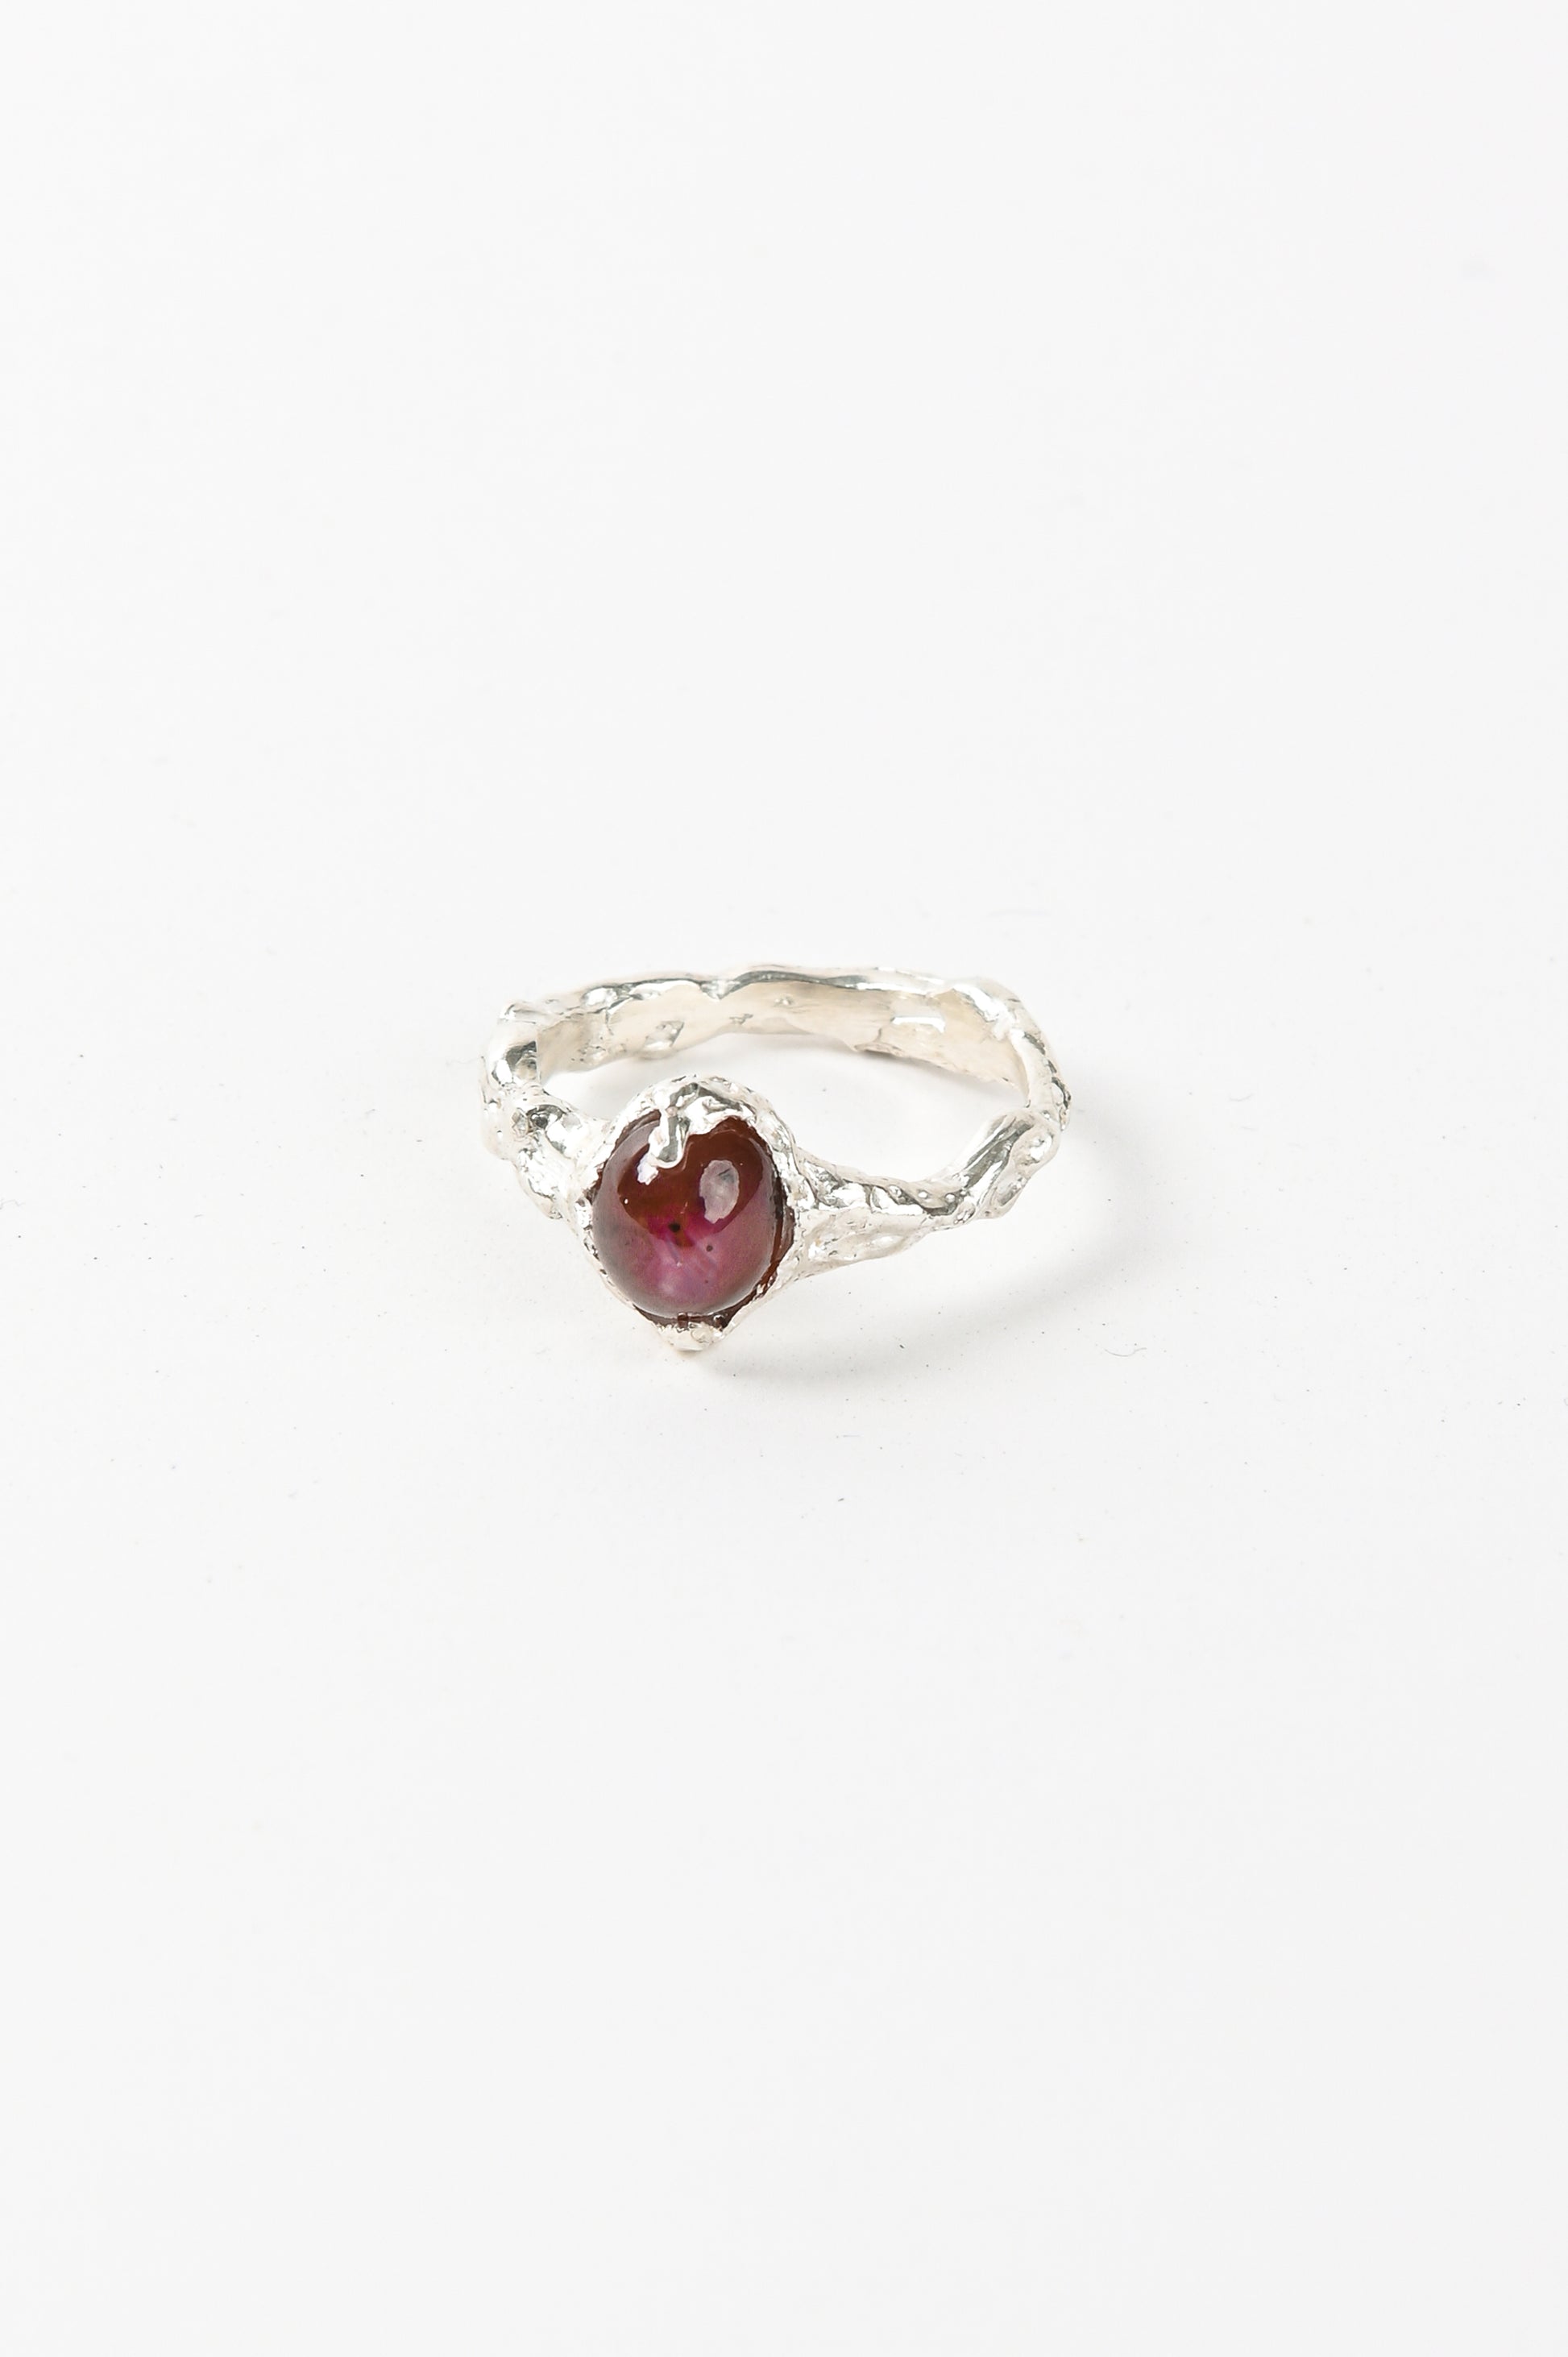 Nadia Ridiandries 'Nymph' Ring With Ruby